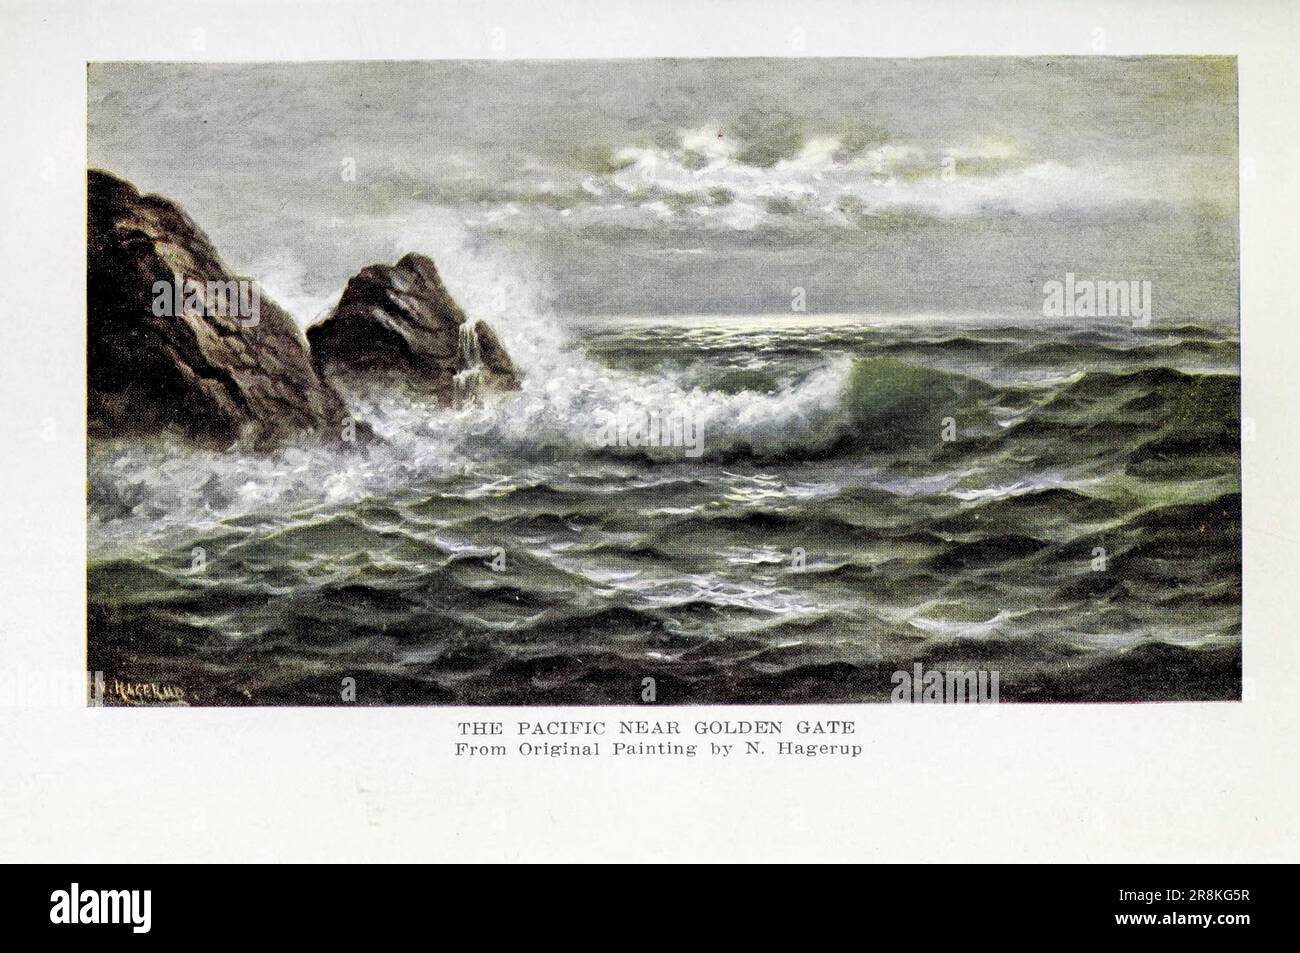 THE PACIFIC NEAR GOLDEN GATE By N. Hagerup from the book ' On sunset highways : a book of motor rambles in California ' by Thomas Dowler Murphy, 1866-1928 Publisher Boston : The Page company in 1915 Stock Photo